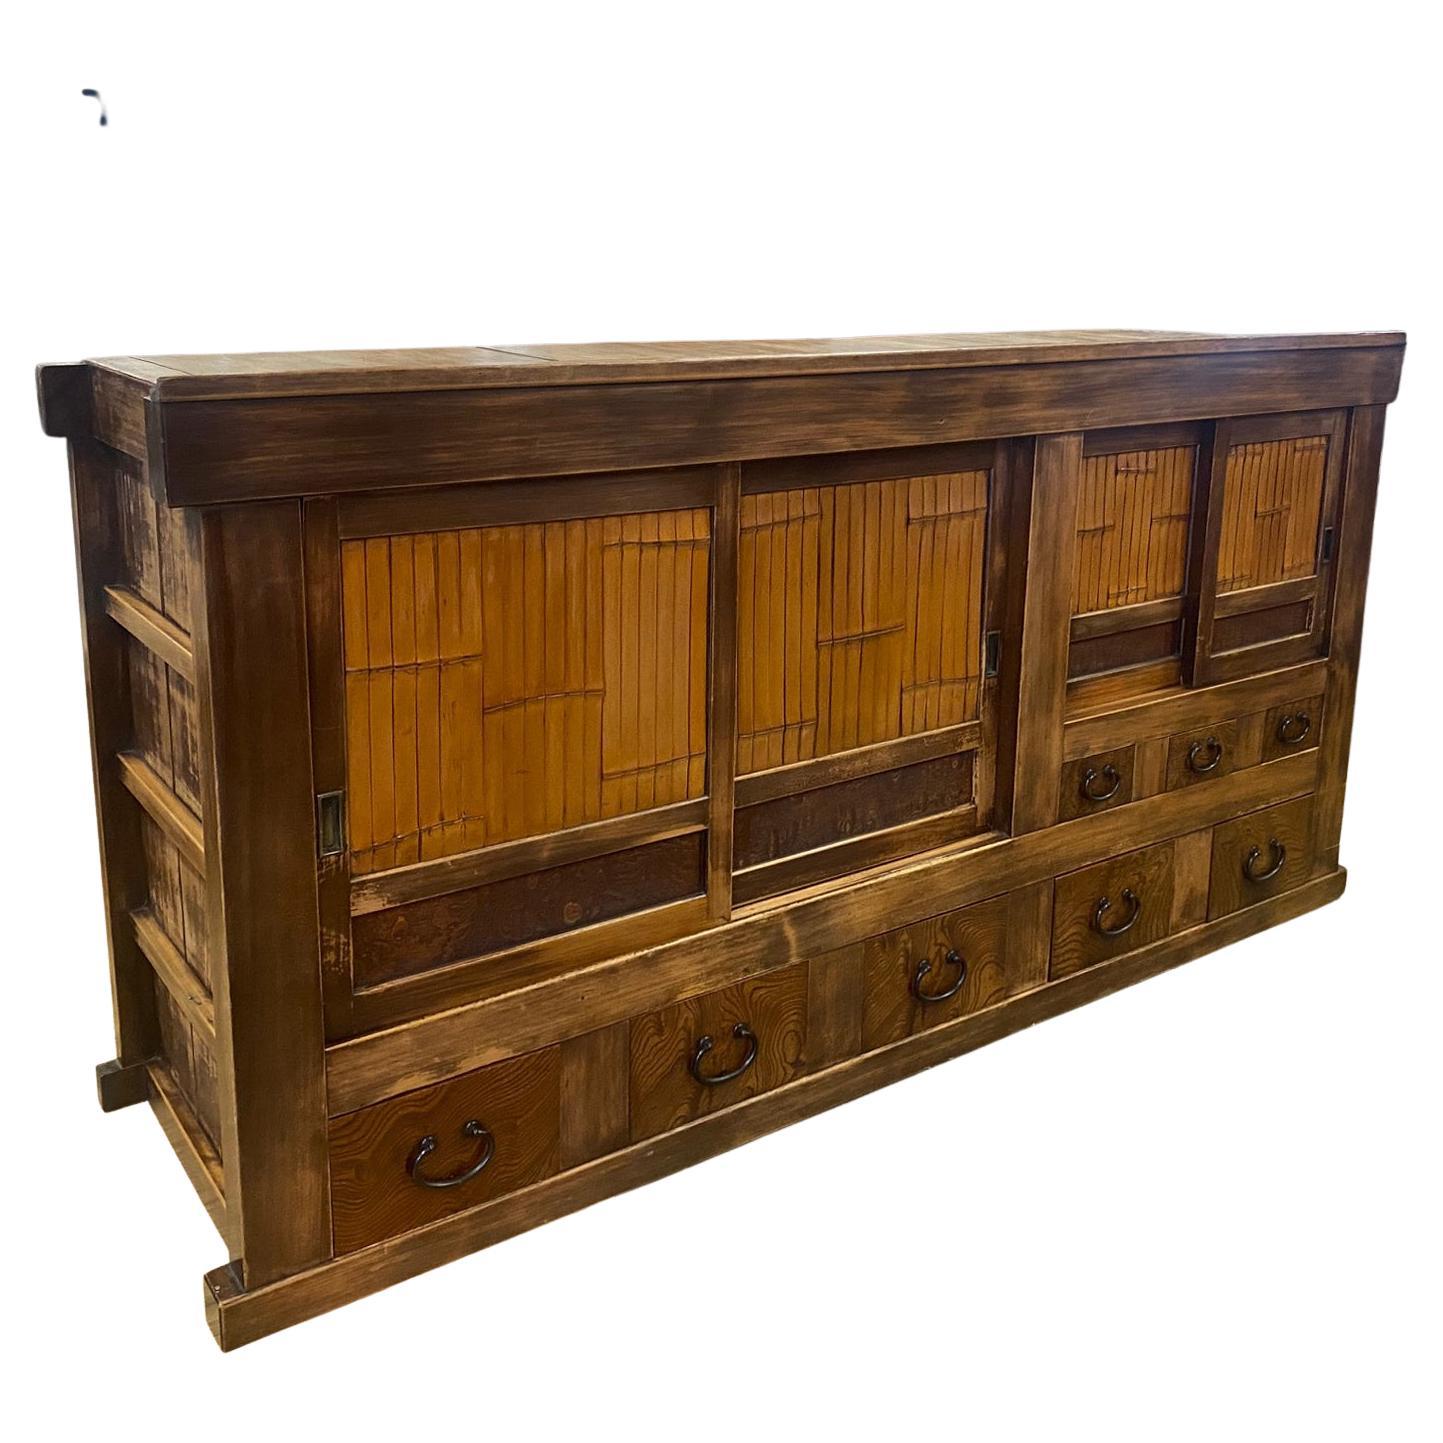 19th Century Shop Chest/Cabinet with Sliding Doors and Drawers